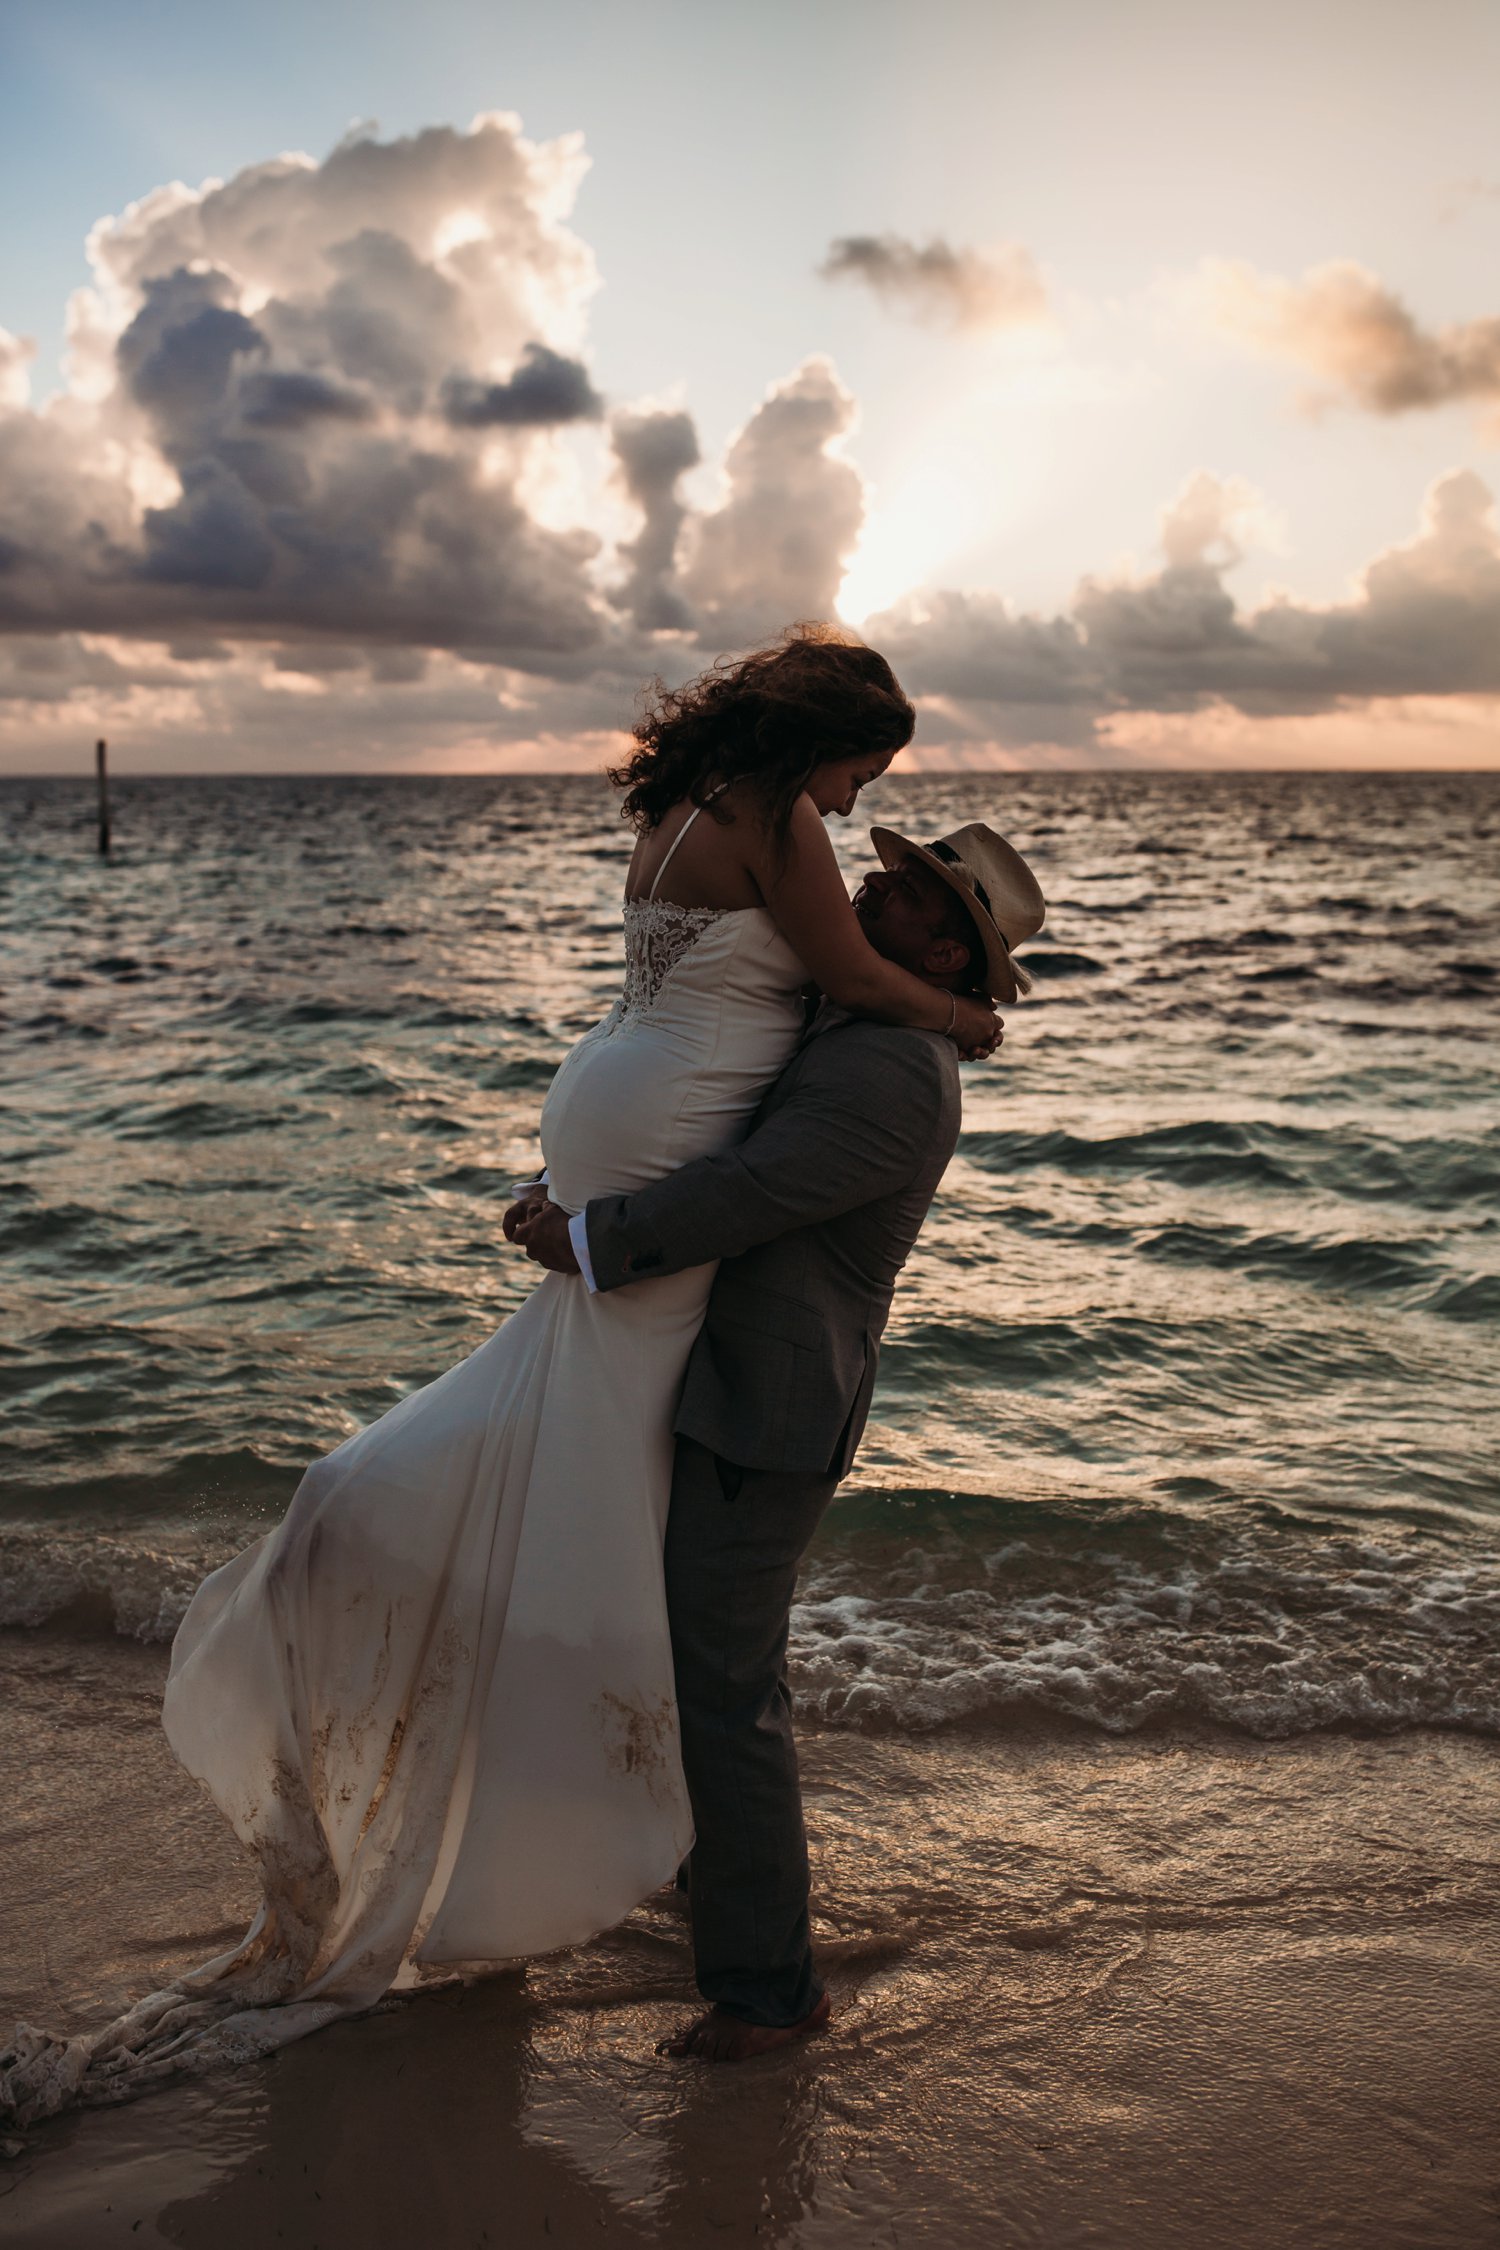  images by feliciathephotographer.com | destination wedding photographer | mexico | tropical | fiji | venue | azul beach resort | riviera maya | bridal sunrise portraits | cotton candy skies | ocean | romantic | whimsical | long lace train | dancing in the water | 